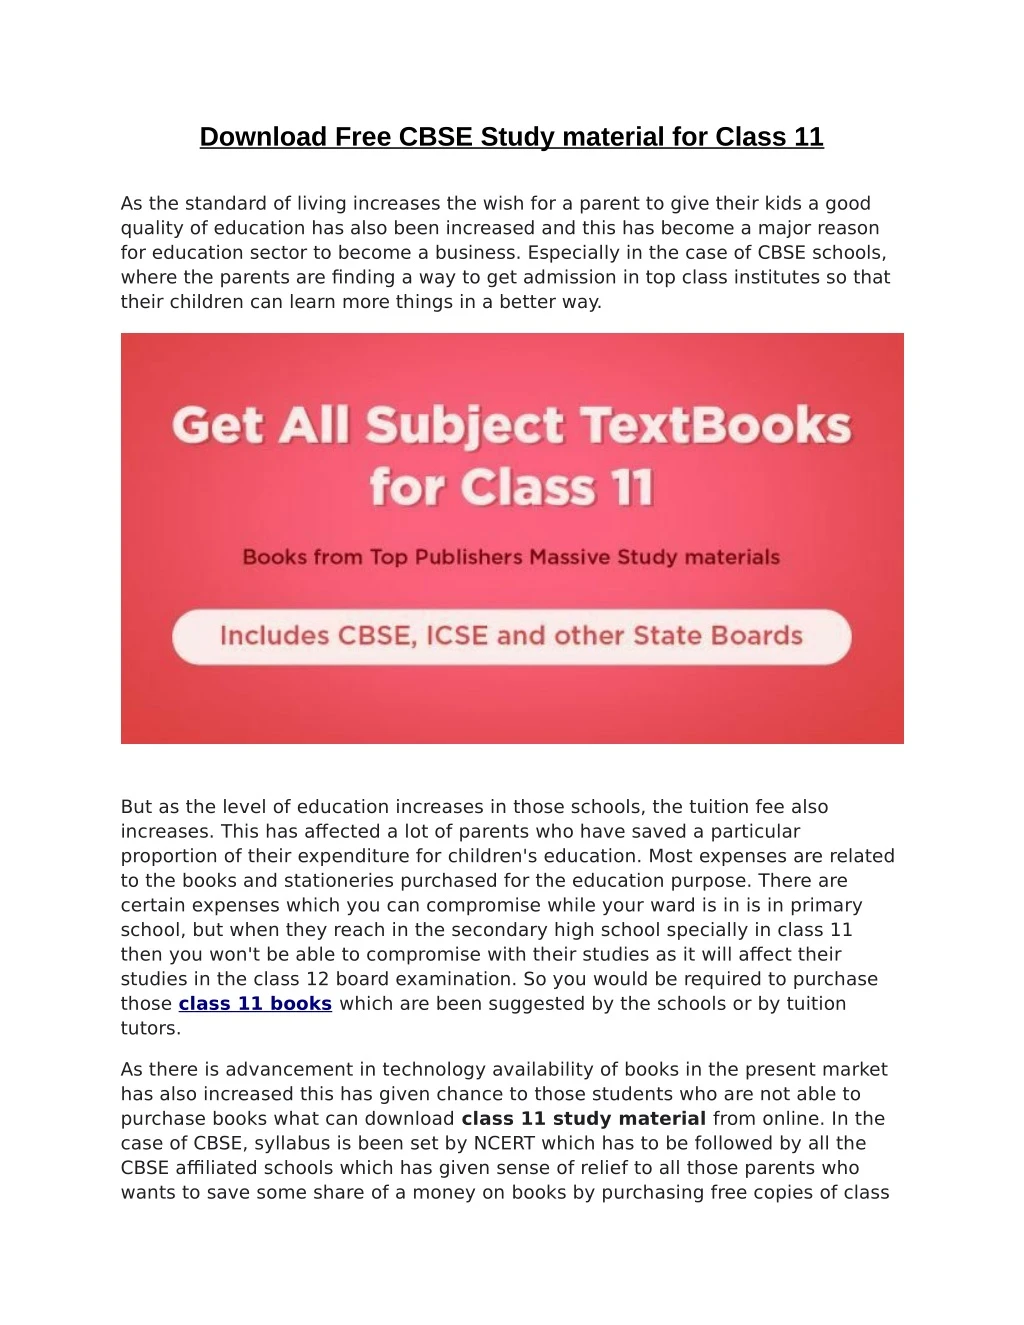 download free cbse study material for class 11